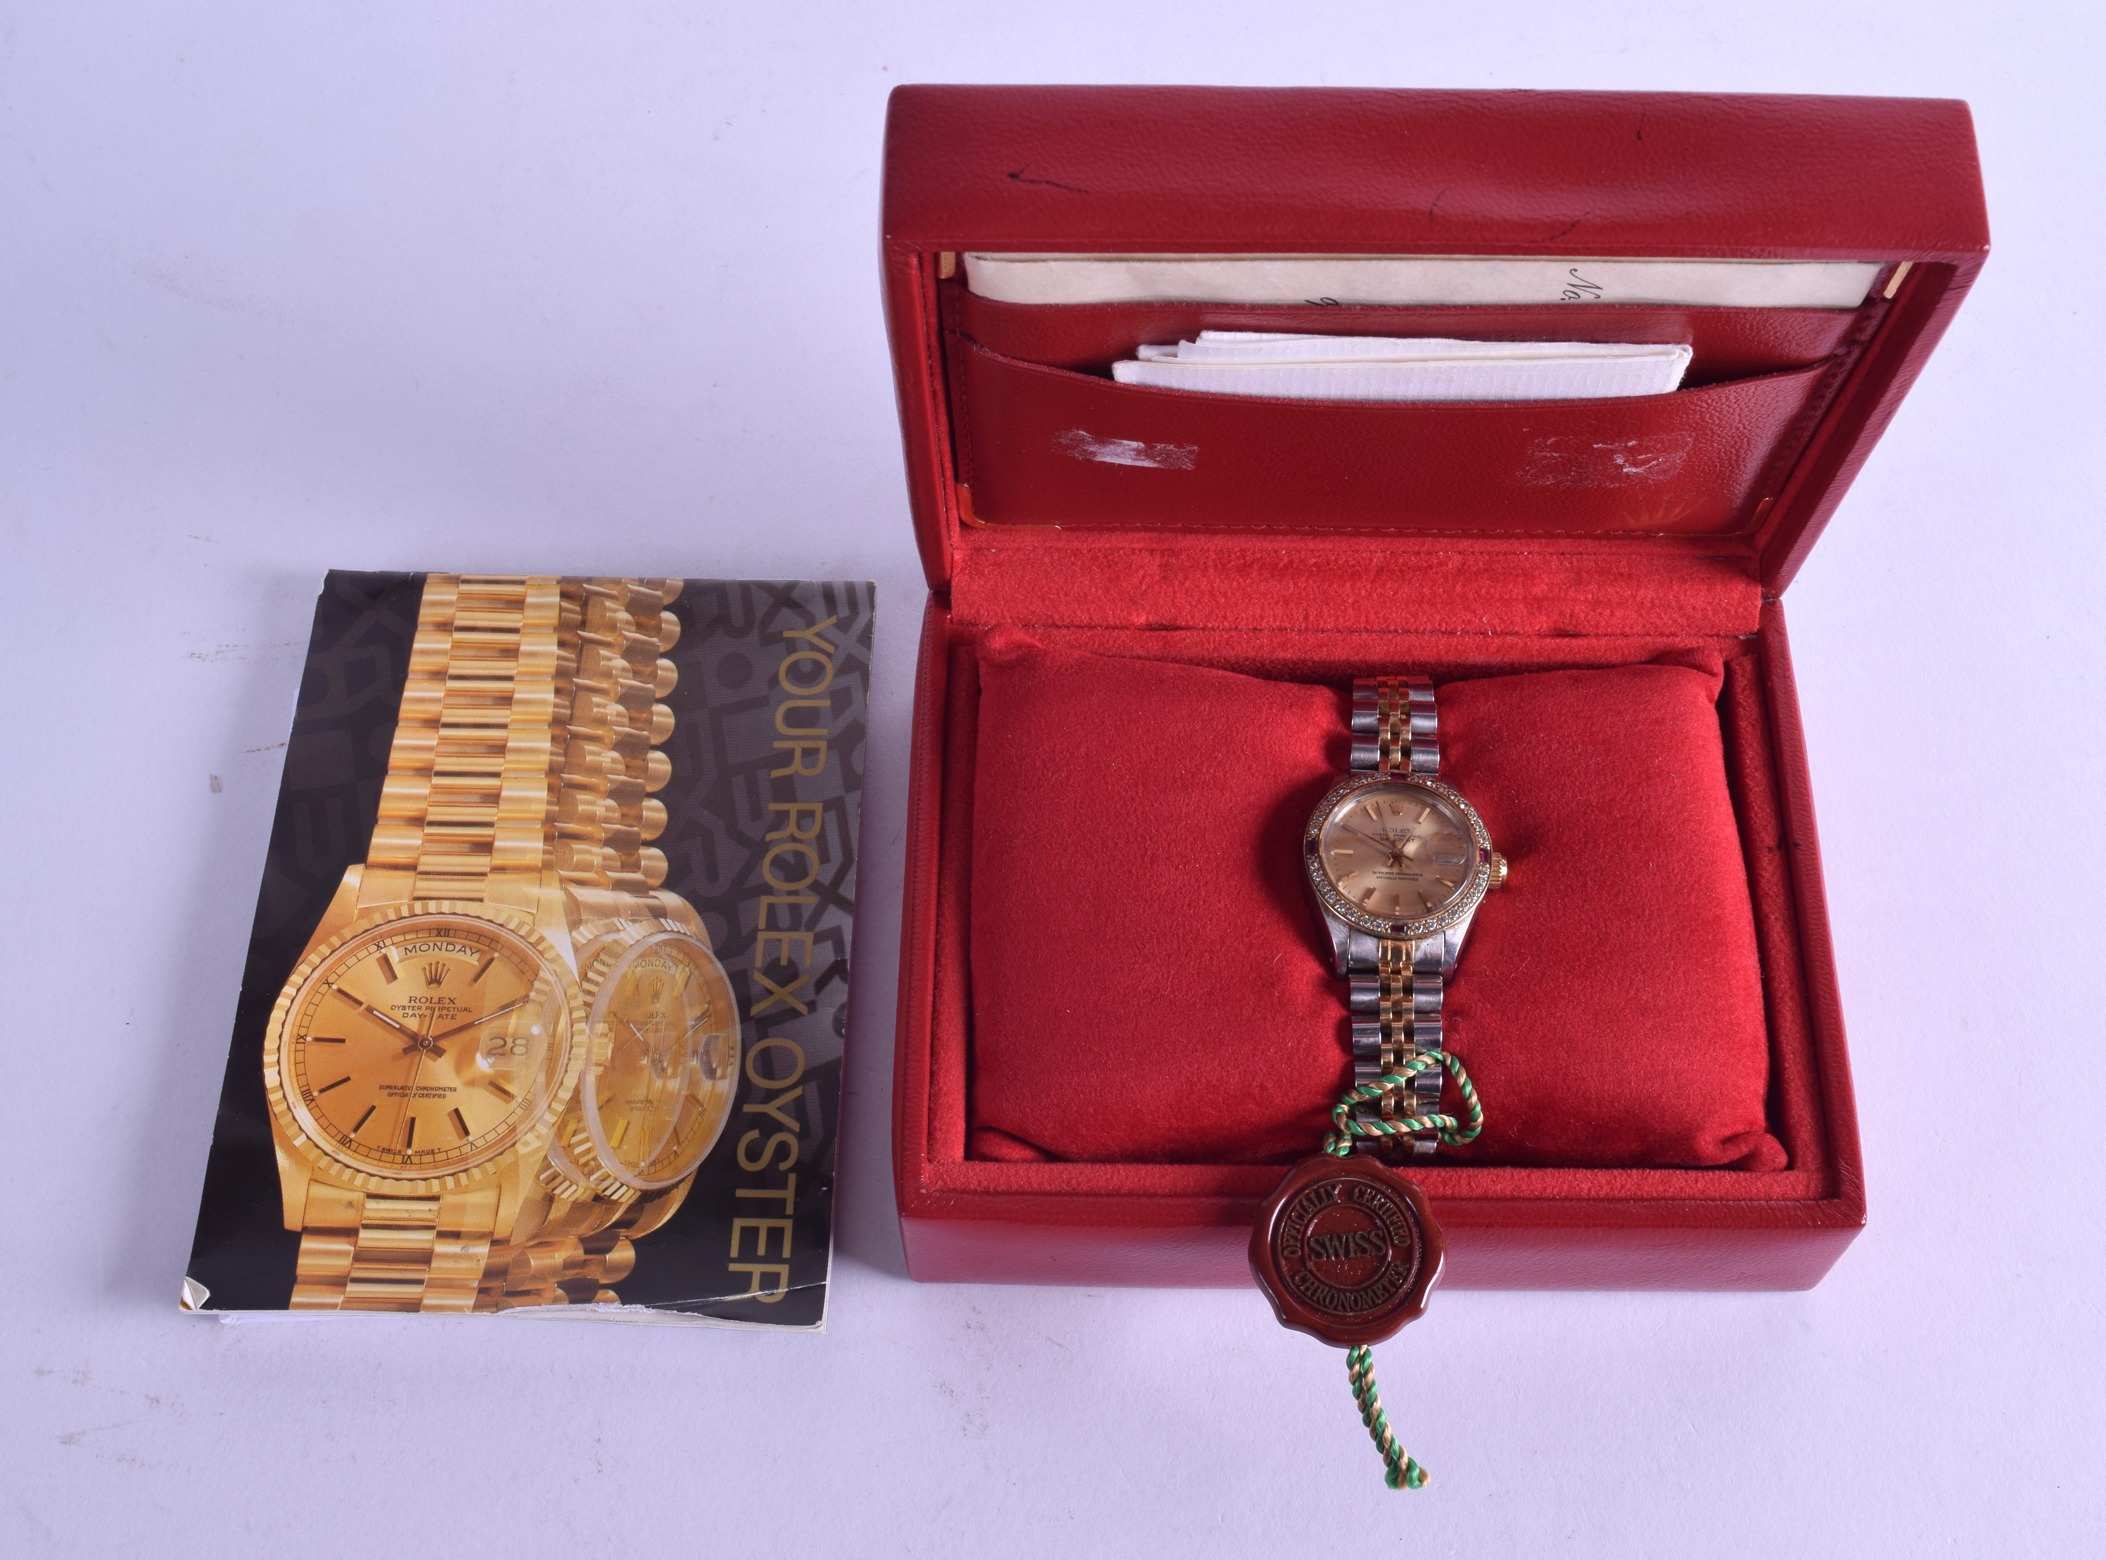 A LADIES GOLD STEEL AND DIAMOND ROLEX WRISTWATCH with original box and papers. Dial 2.5 cm